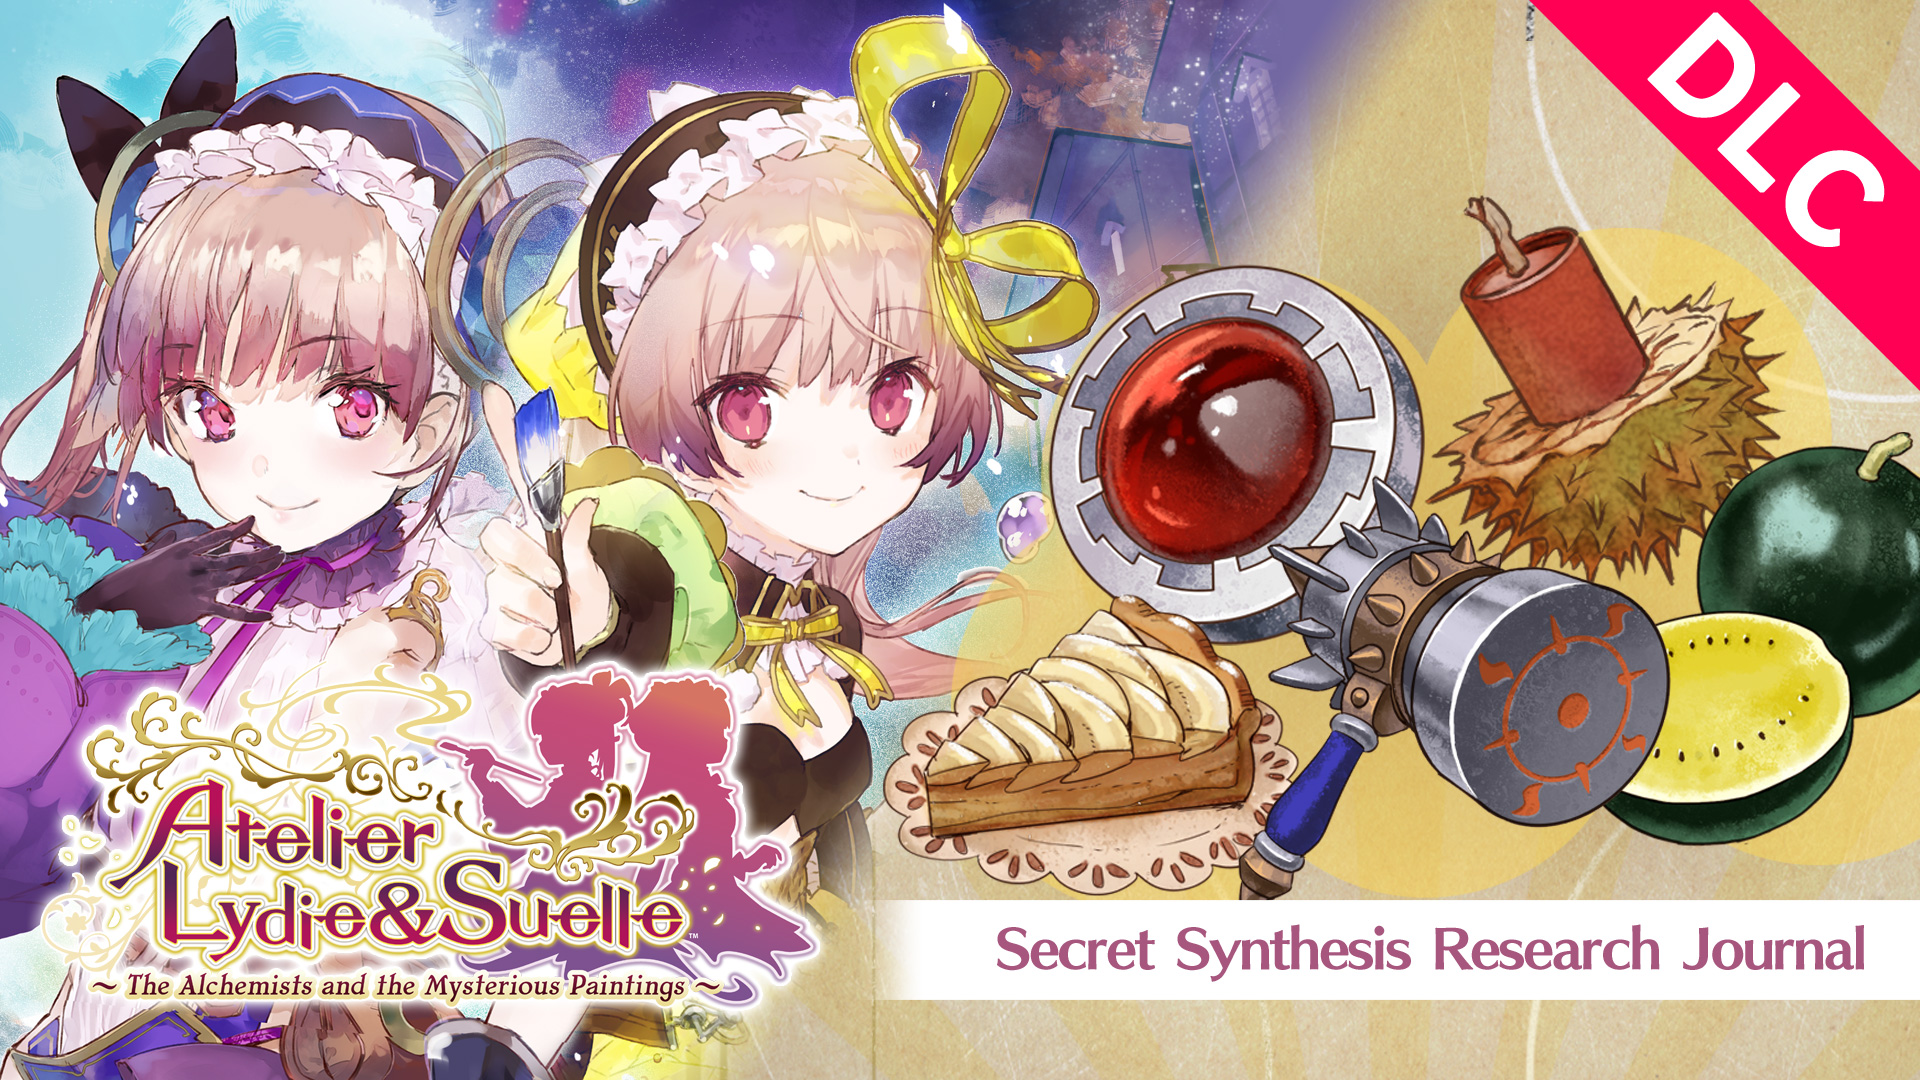 Secret Synthesis Research Journal